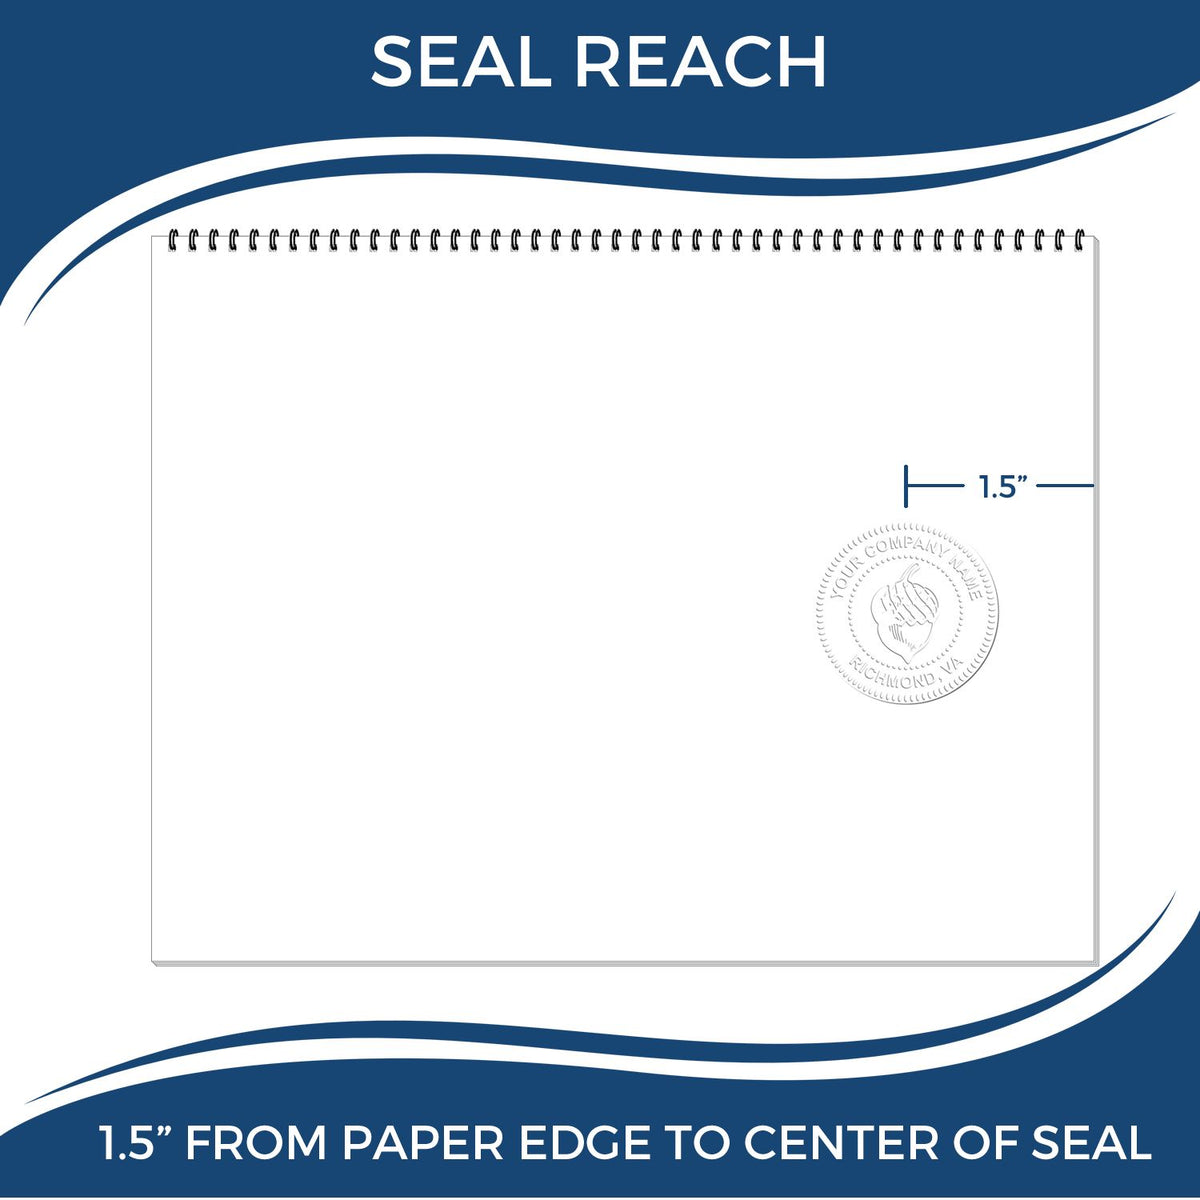 An infographic showing the seal reach which is represented by a ruler and a miniature seal image of the Soft Pocket Alabama Landscape Architect Embosser